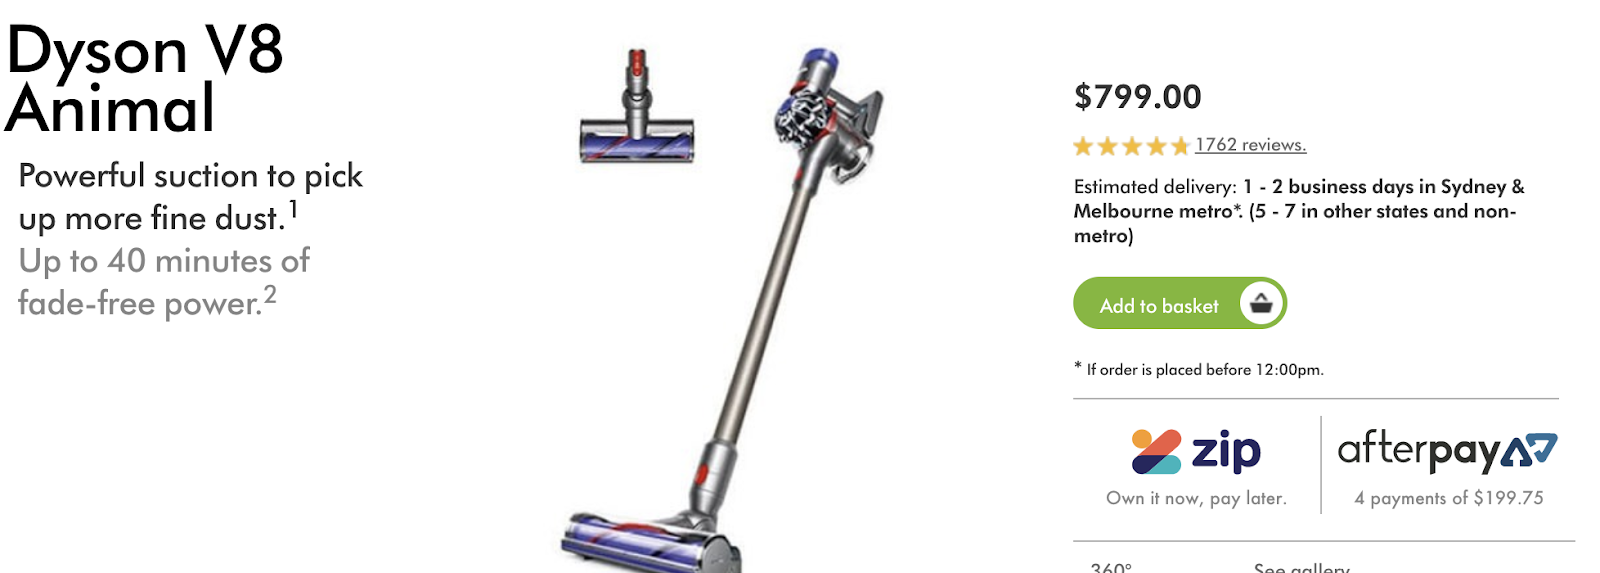 Dyson Vacuum Cleaner from the Dyson store